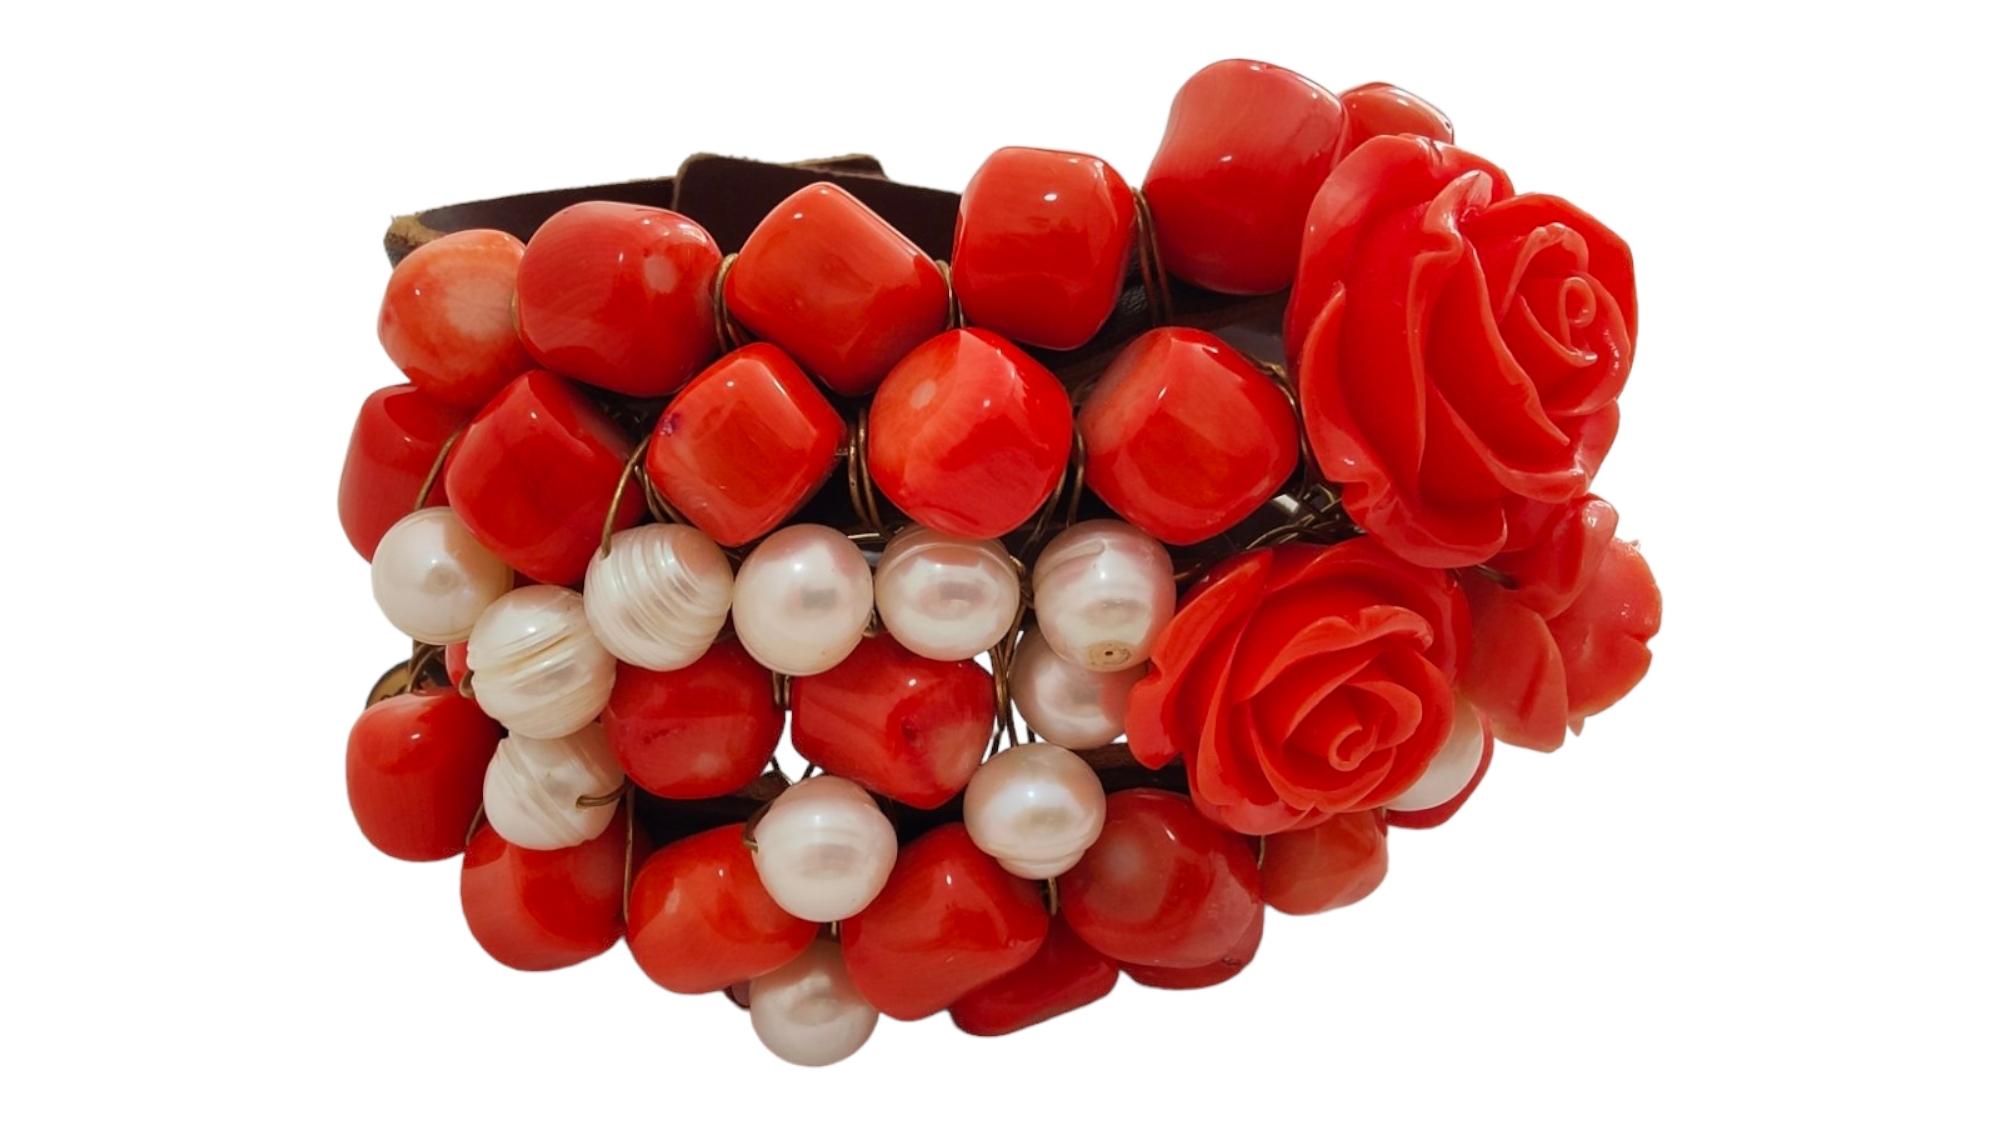 Vintage Bracelet In Carved Red Coral And pearls Beads
VERY ELEGANT BRACELET FROM THE 70'S MADE WITH MEDITERRANEAN RED CORAL CARVED WITH SHAPES OF FLOWERS AND PEARLS. EXCELLENT CONDITION. MEASURES: 20X7X3 CM. WEIGHT: 156g